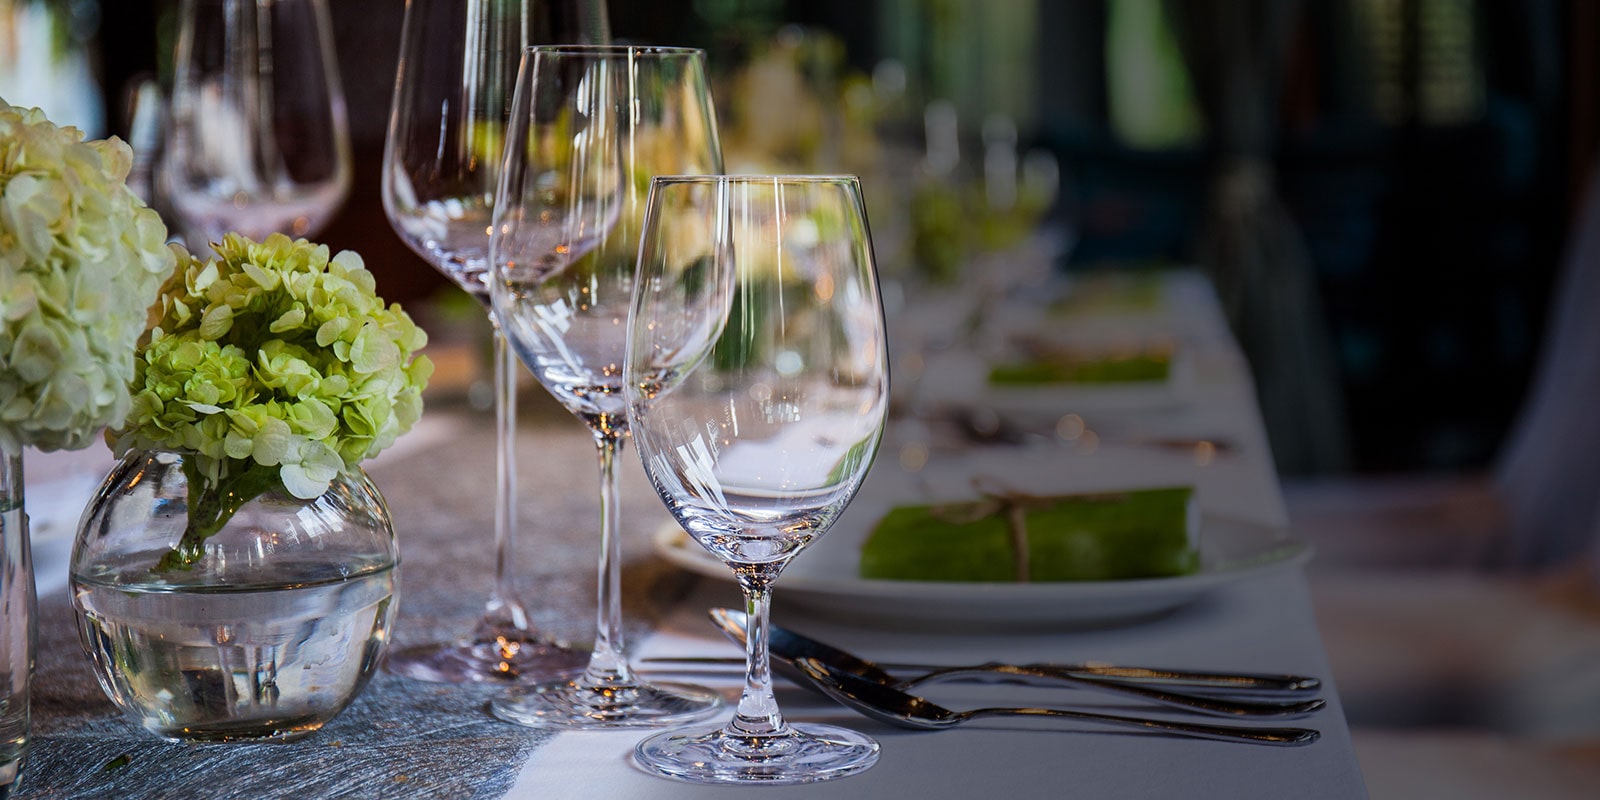 Sparkling dishes and glassware